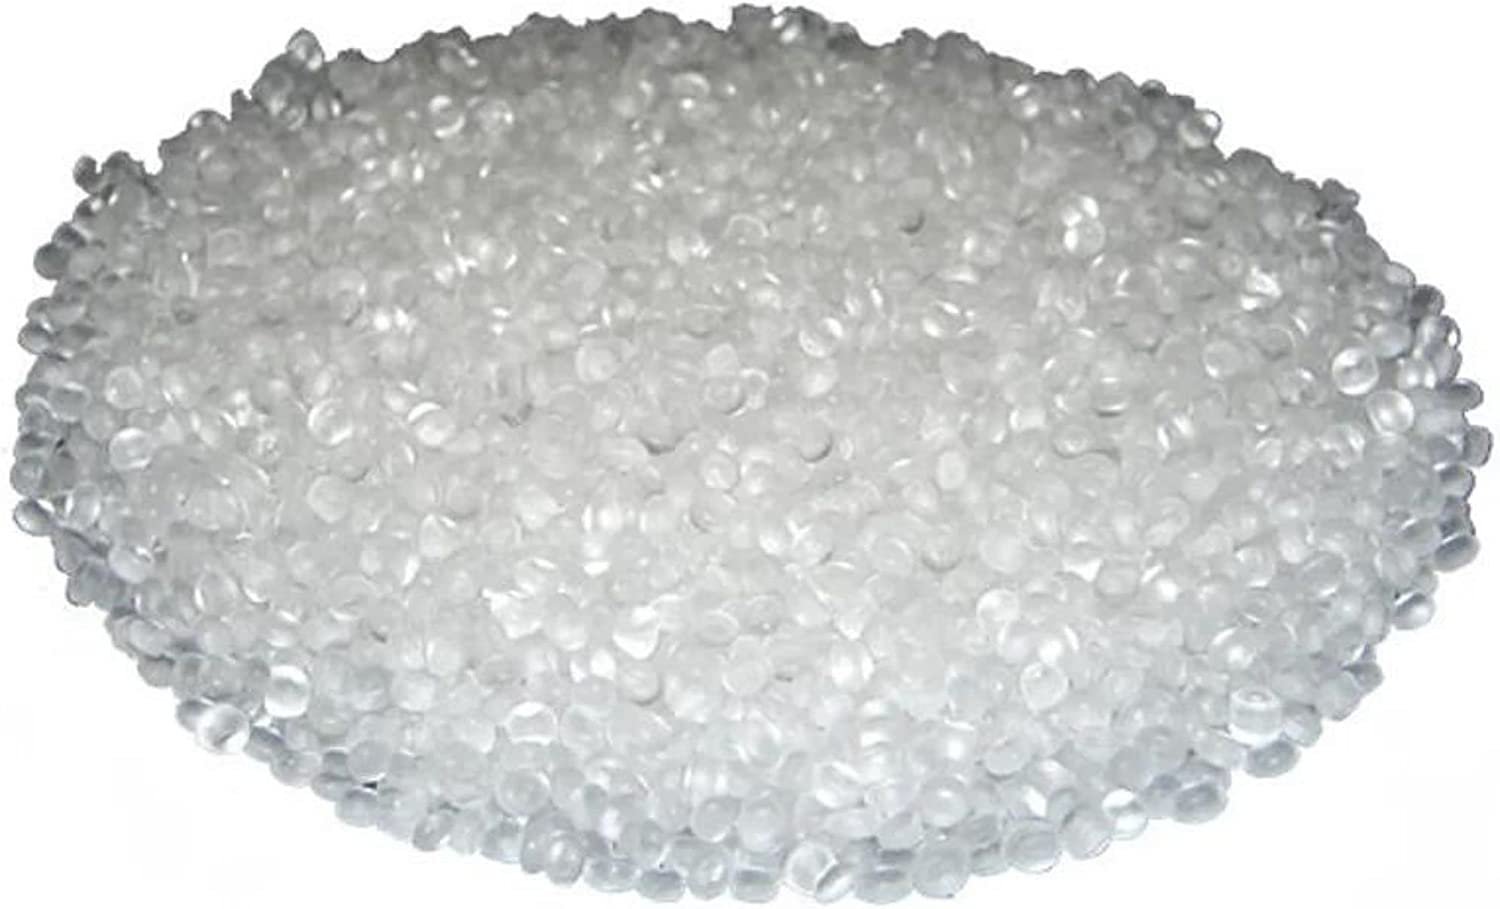 3 lb Unscented Blood Cell Eva Aroma Beads Freshie Supplies Blood Cell Shape Beads Bulk Unscented Freshie Beads, Adult Unisex, Size: One size, Clear